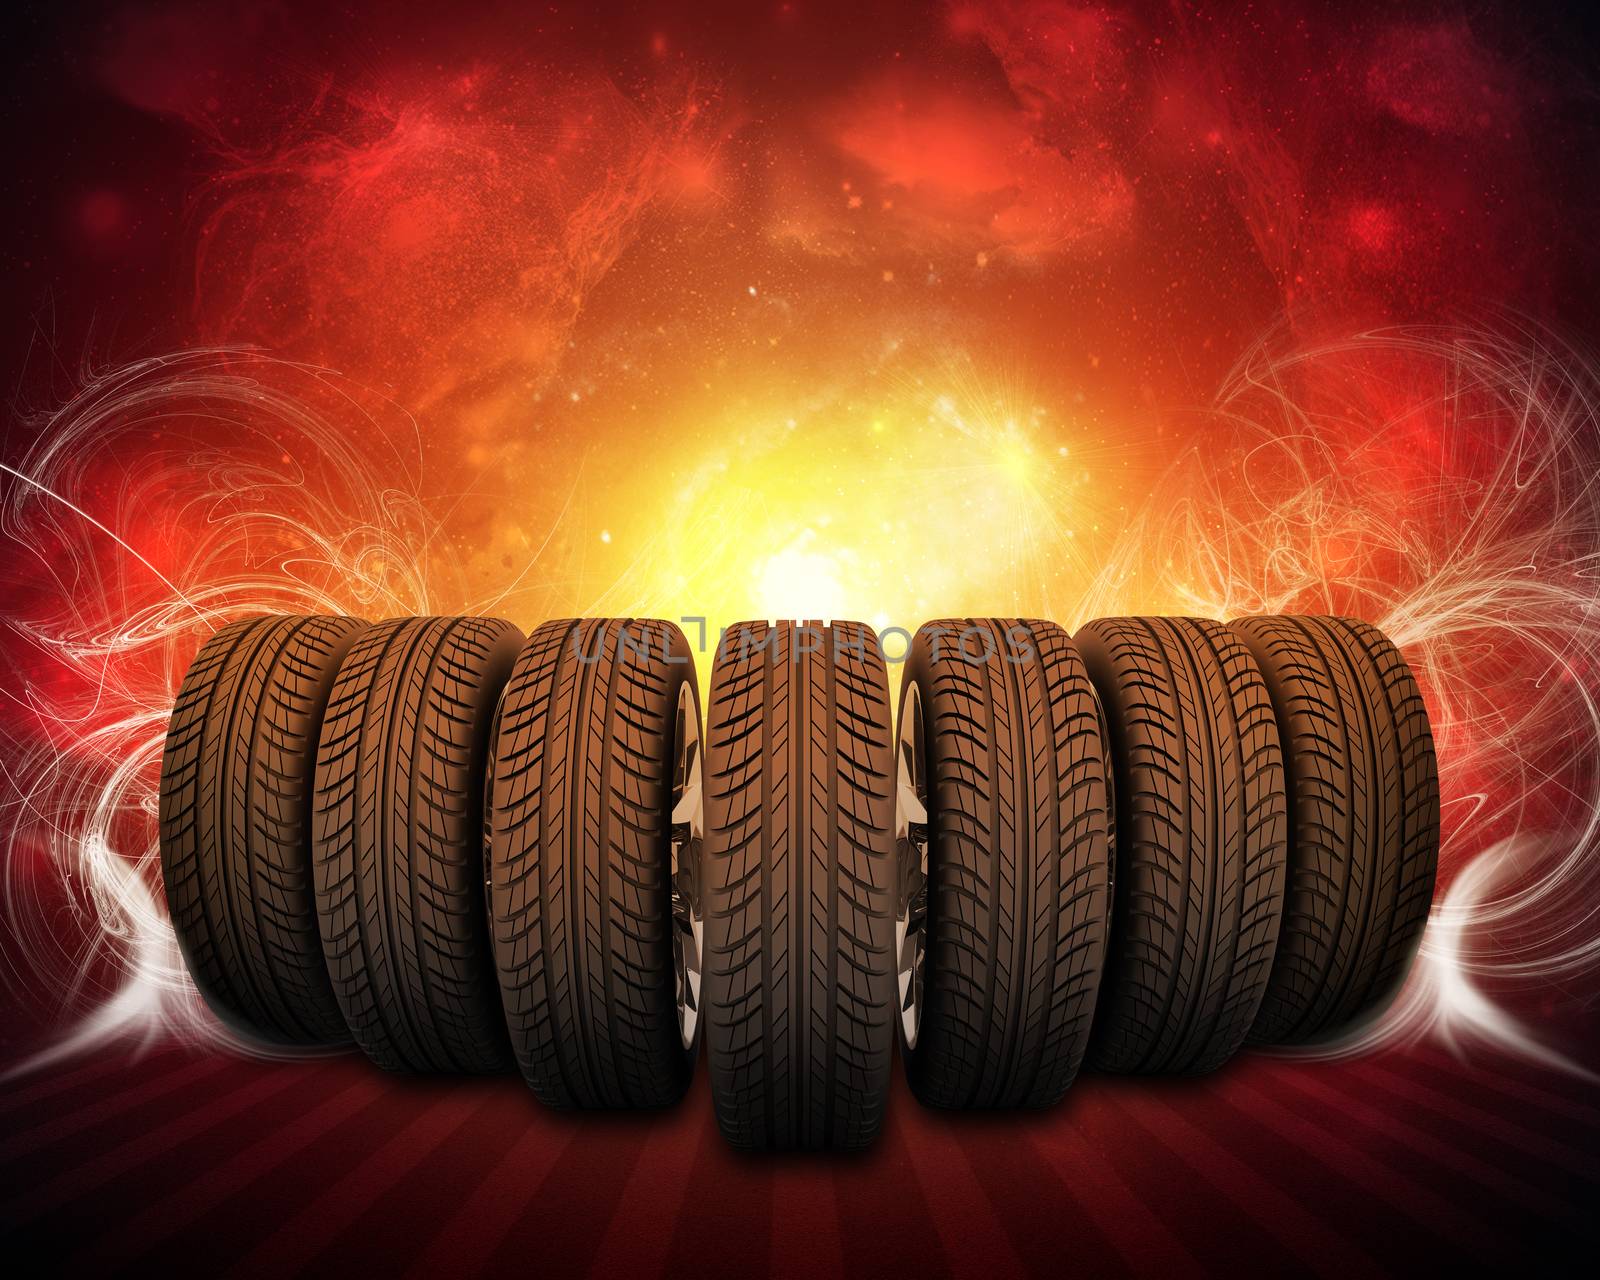 Wedge of new car wheels. Background is night sky and stripes at bottom by cherezoff